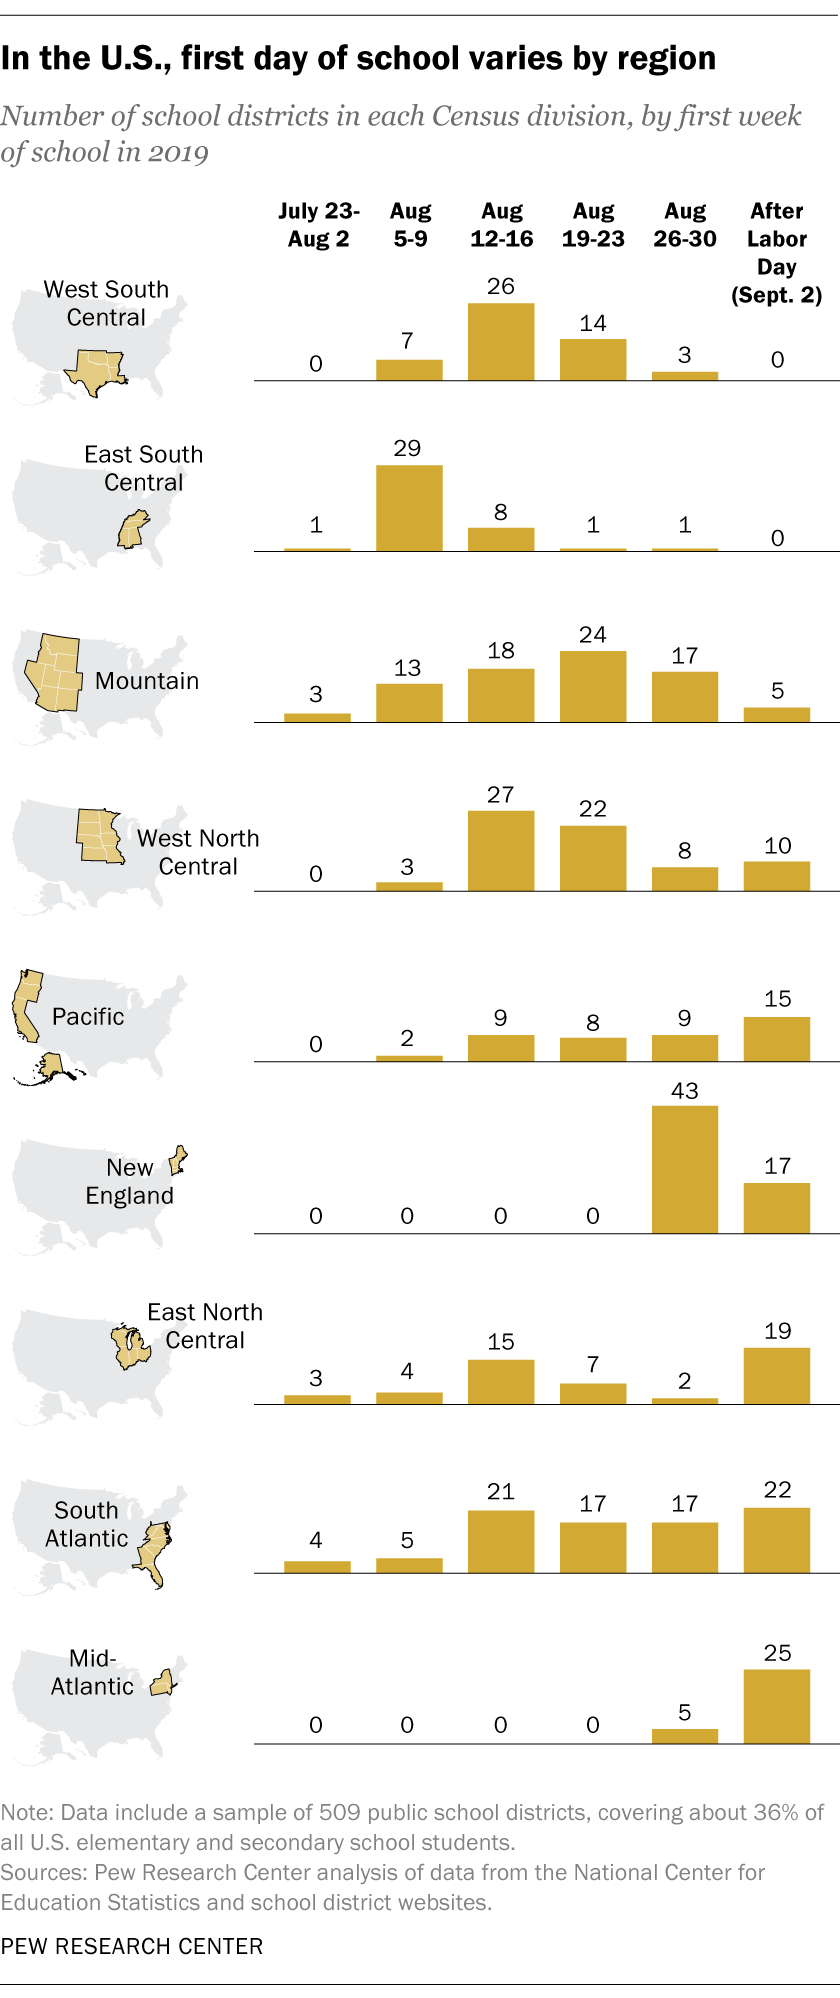 In the U.S., first day of school varies by region